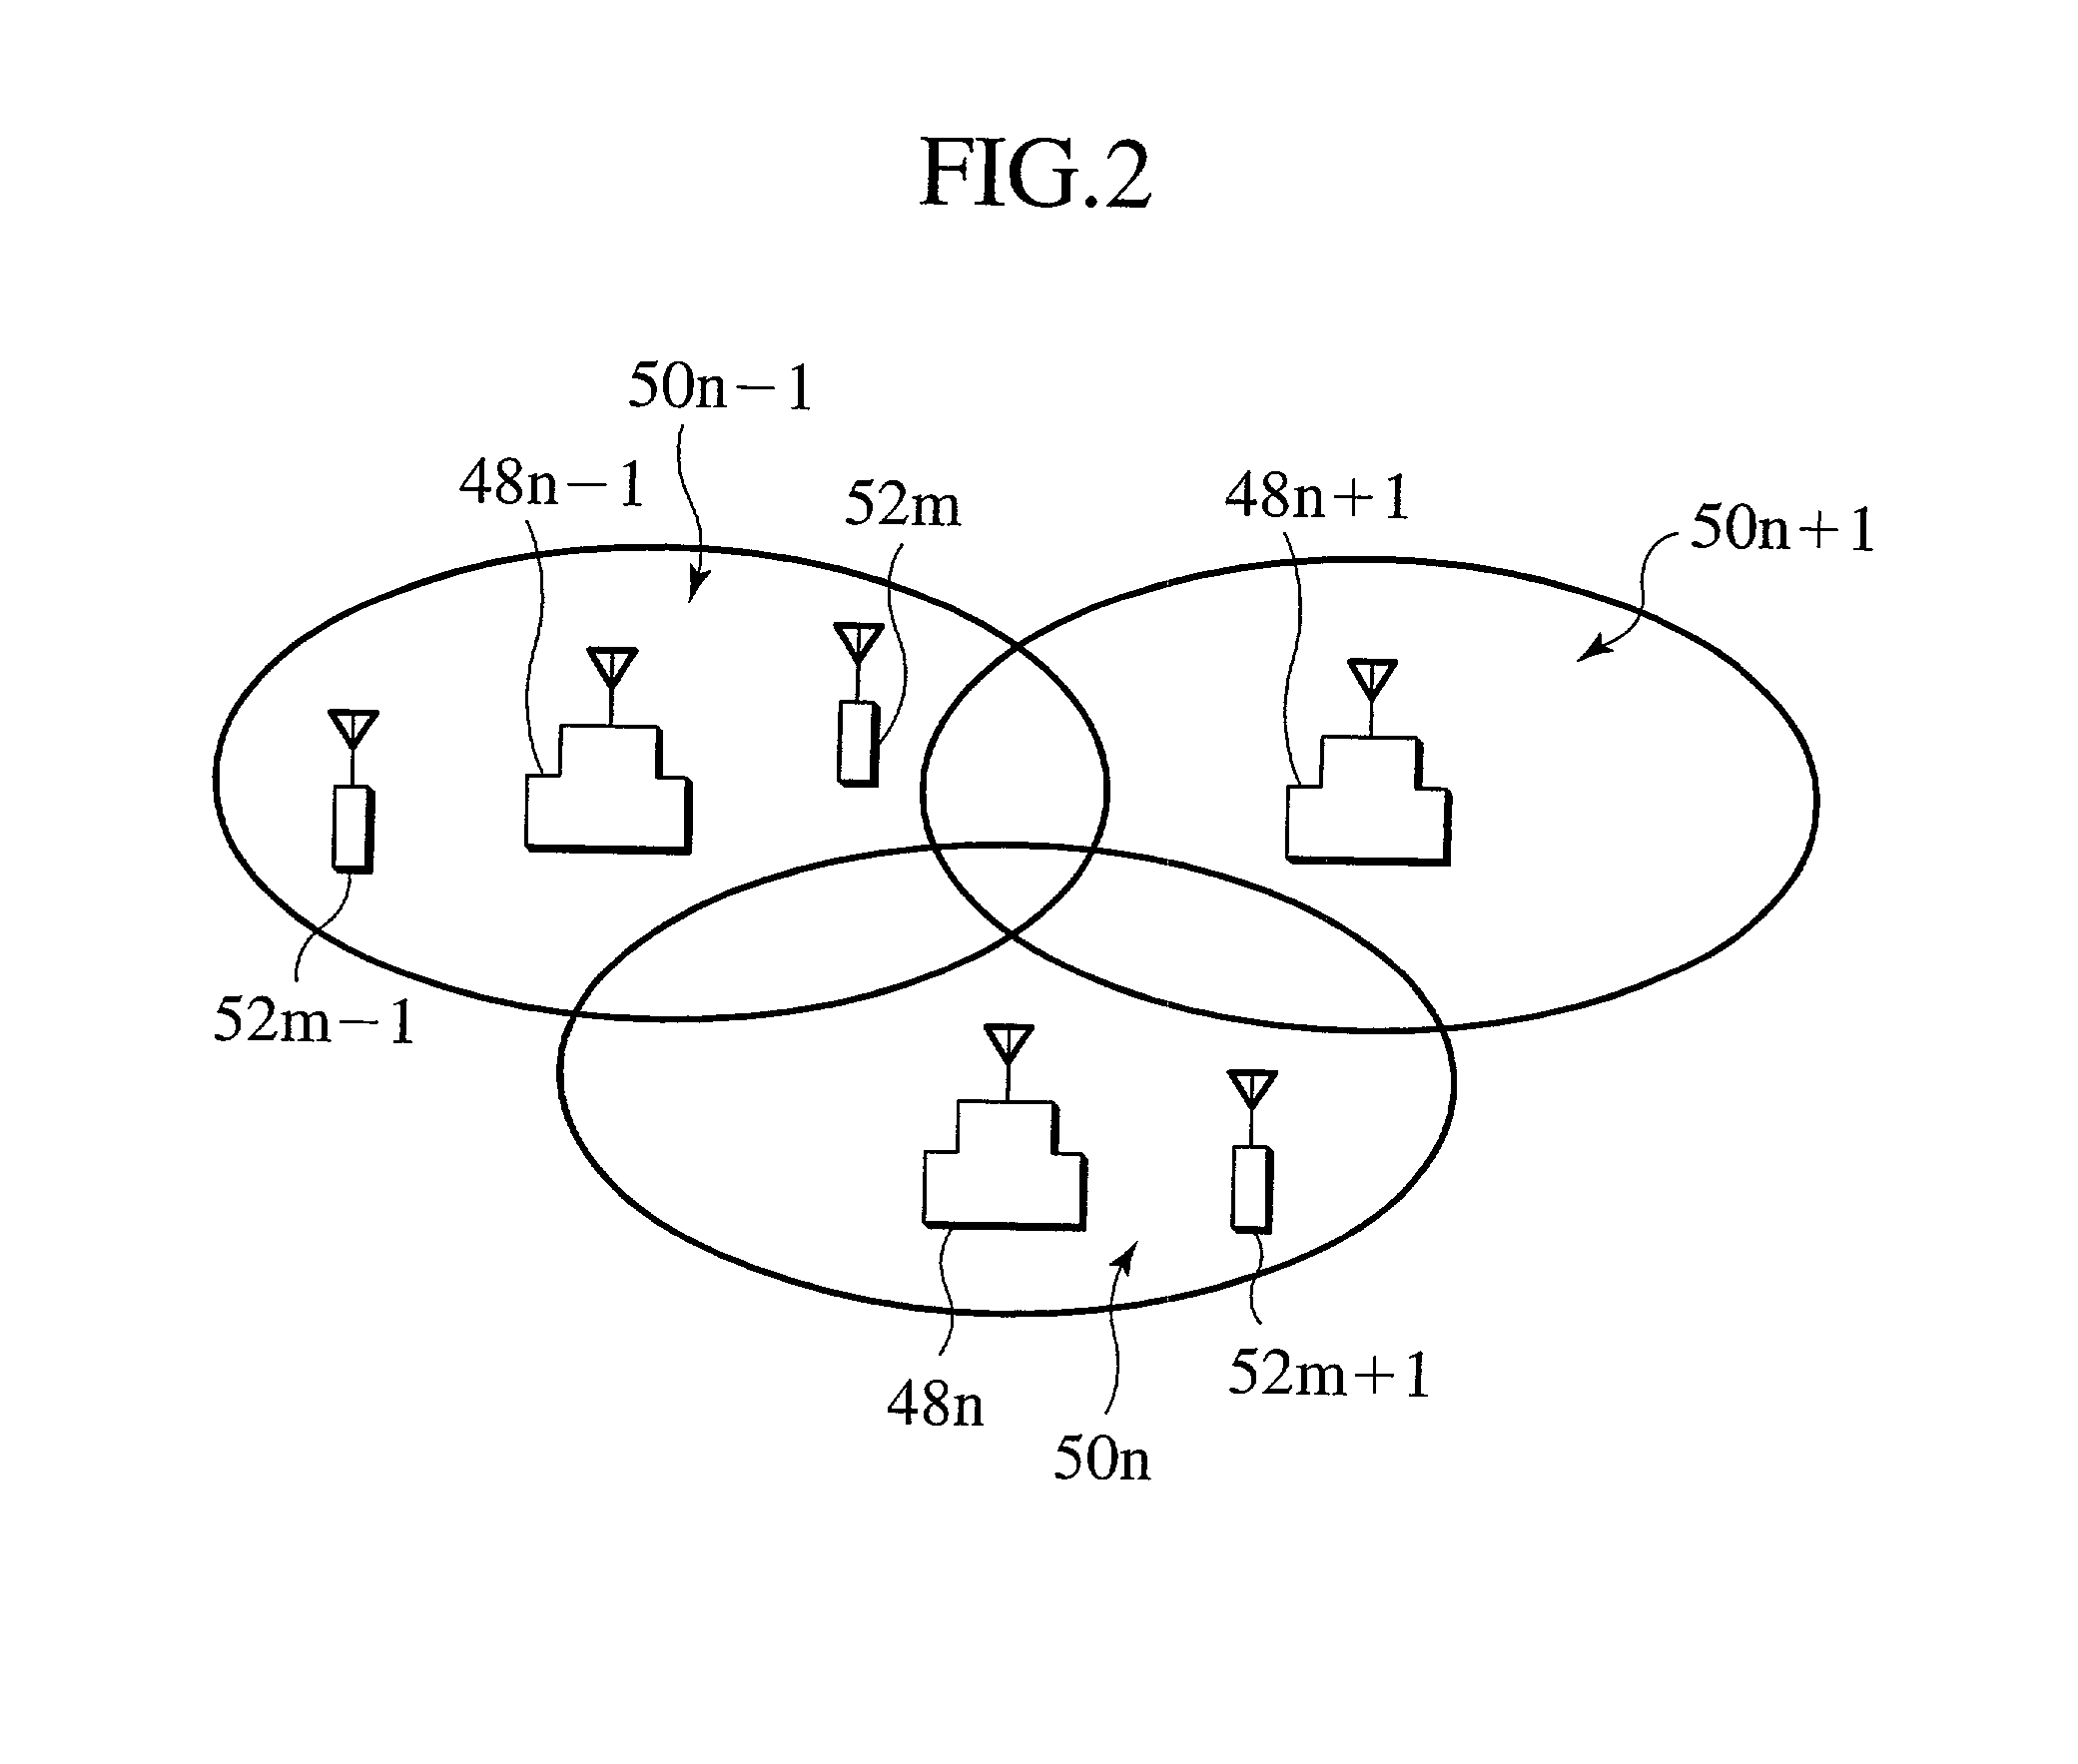 Transmitter apparatus and receiver apparatus and base station making use of orthogonal frequency division multiplexing and spectrum spreading